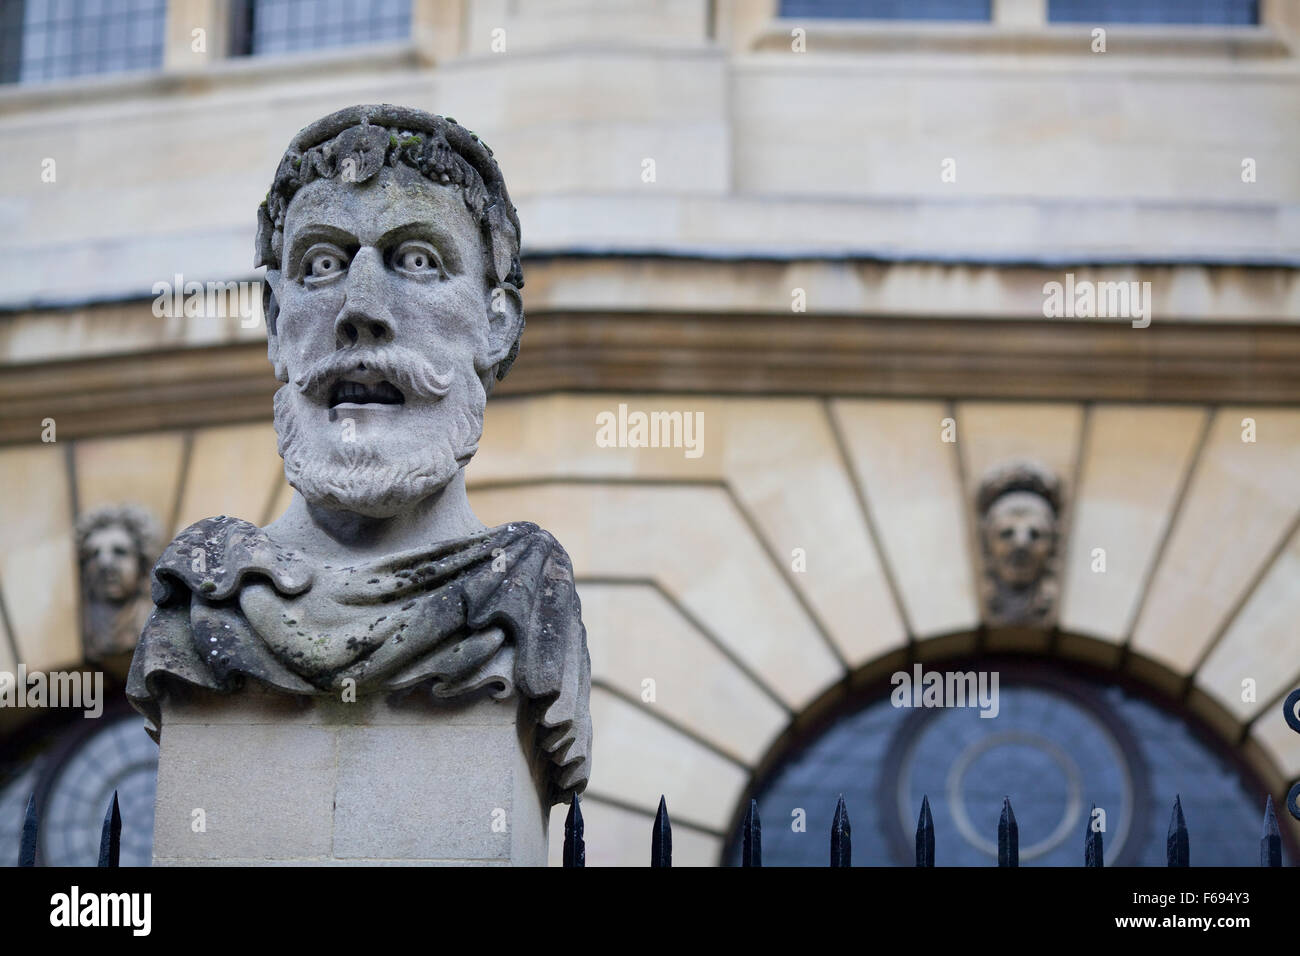 Carved stone busts on plinths outside Sheldonian theatre, Oxford, England Stock Photo